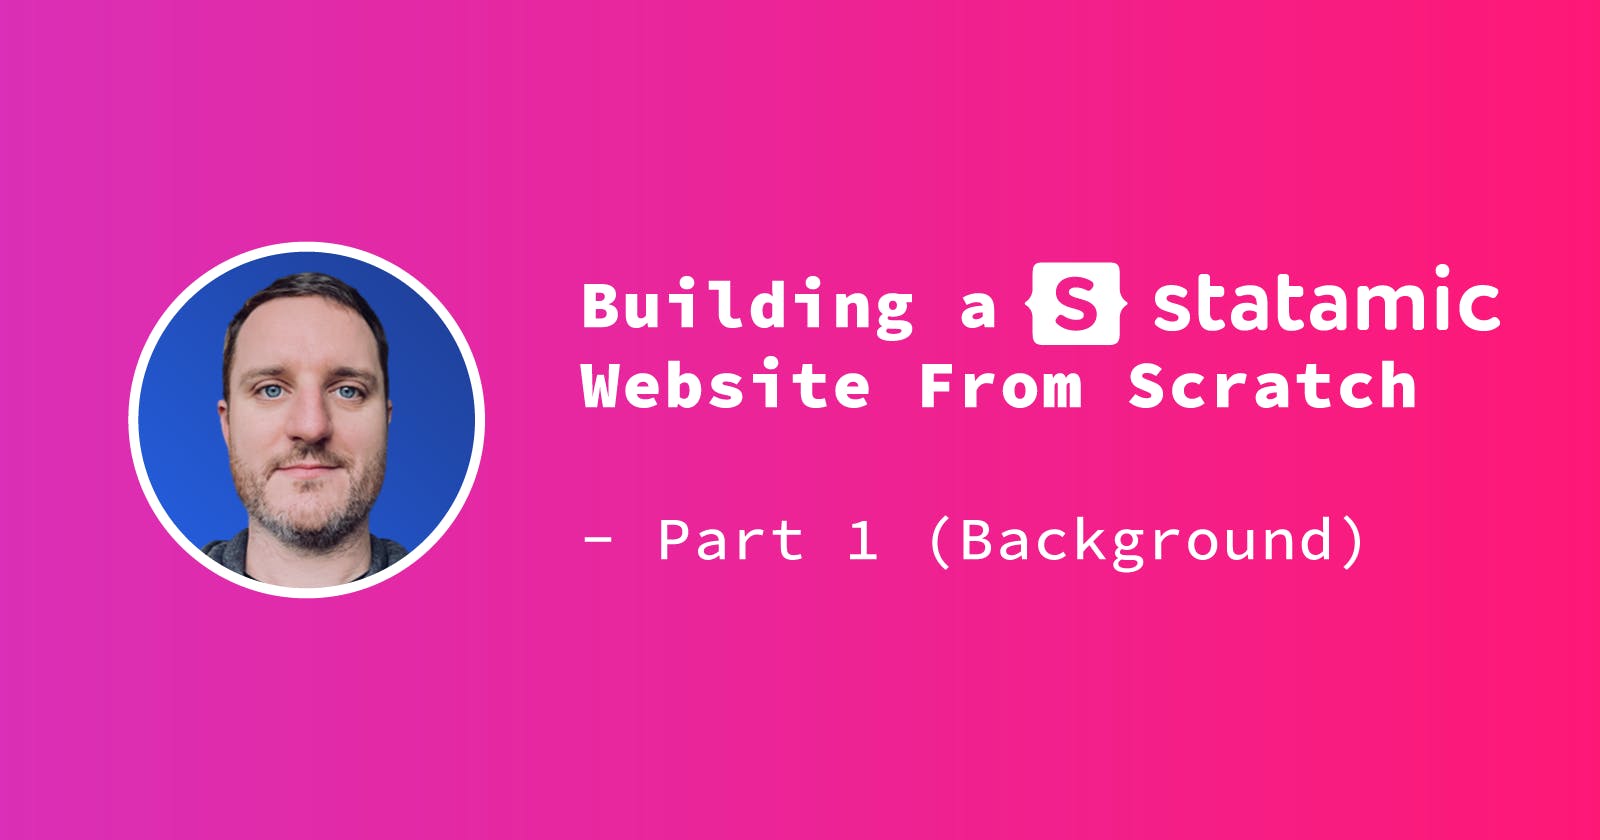 Building a Statamic Website From Scratch - Part 1 (Background)